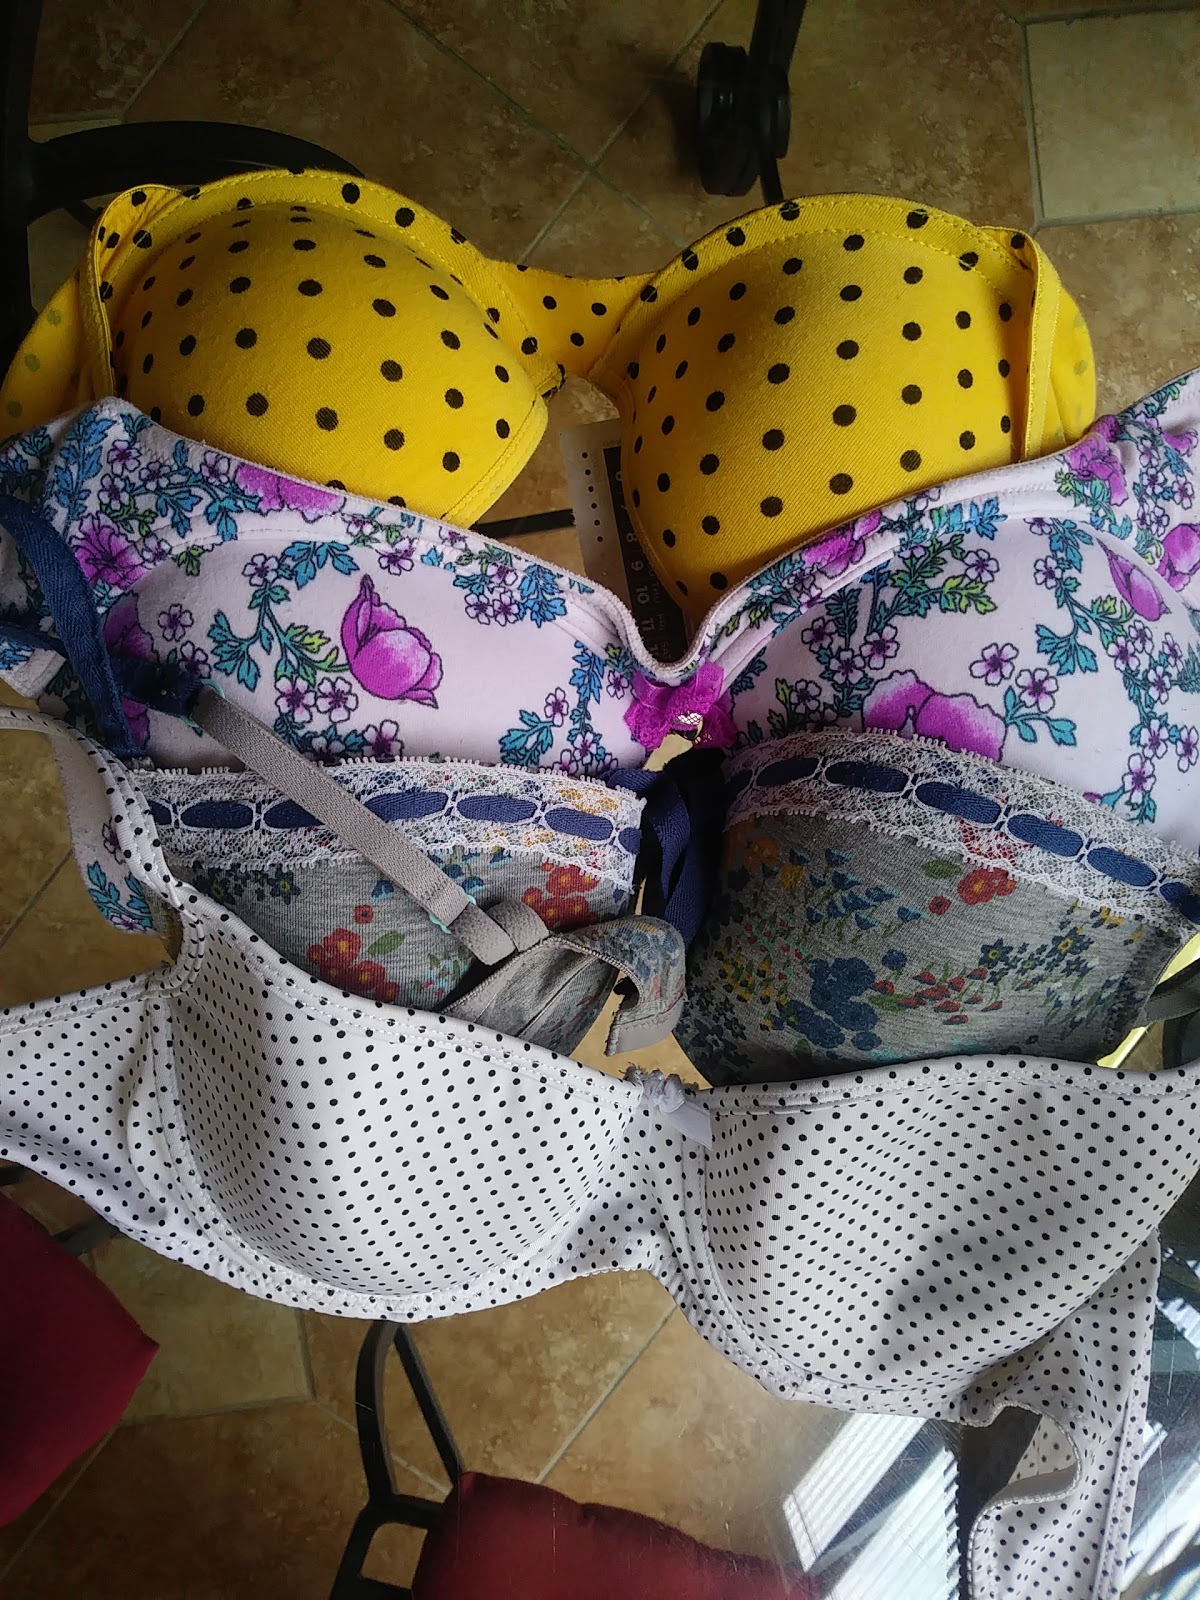 Transitioning into Tomorrow: Tuesday August 8, 2017 - Bra donation